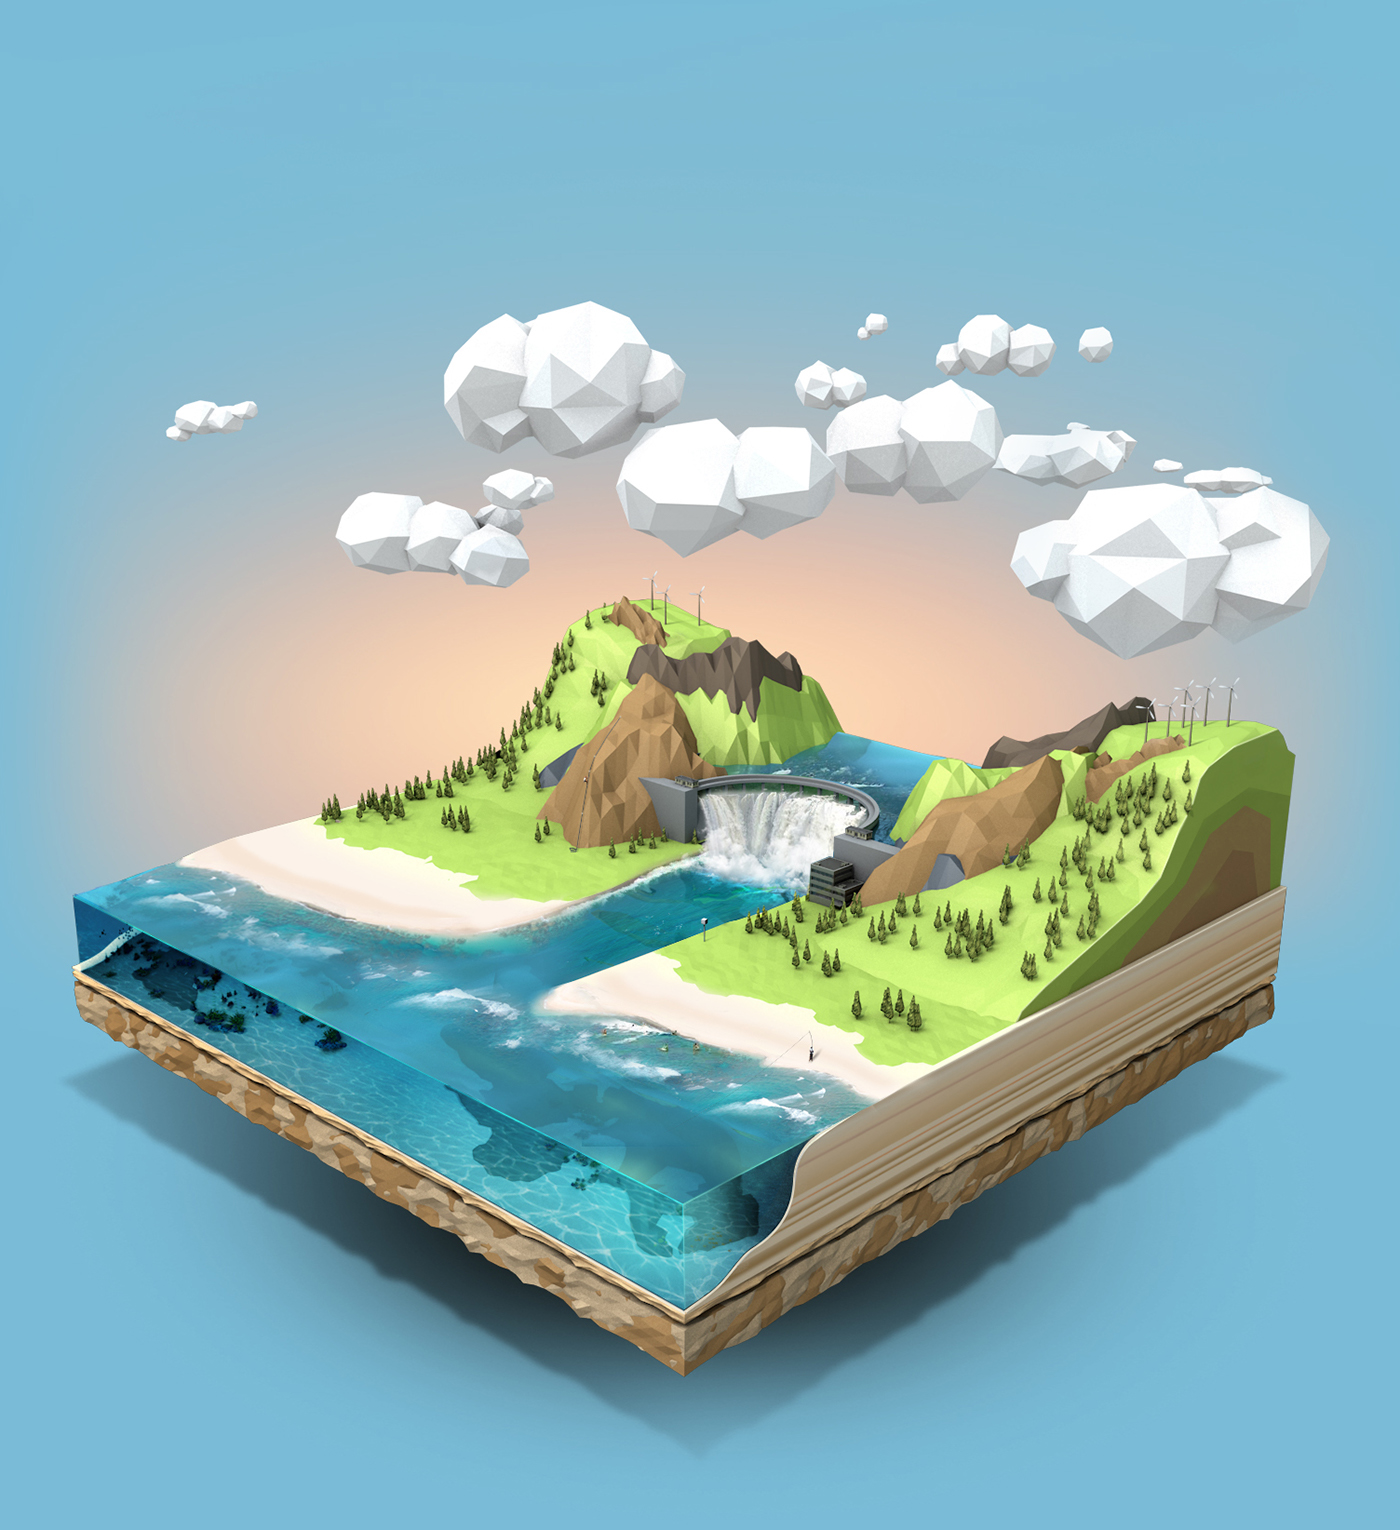 Low Poly lowpoly scene landscapes 3D Render mountains cinema4d Cinema modeling new scenic land Nature water